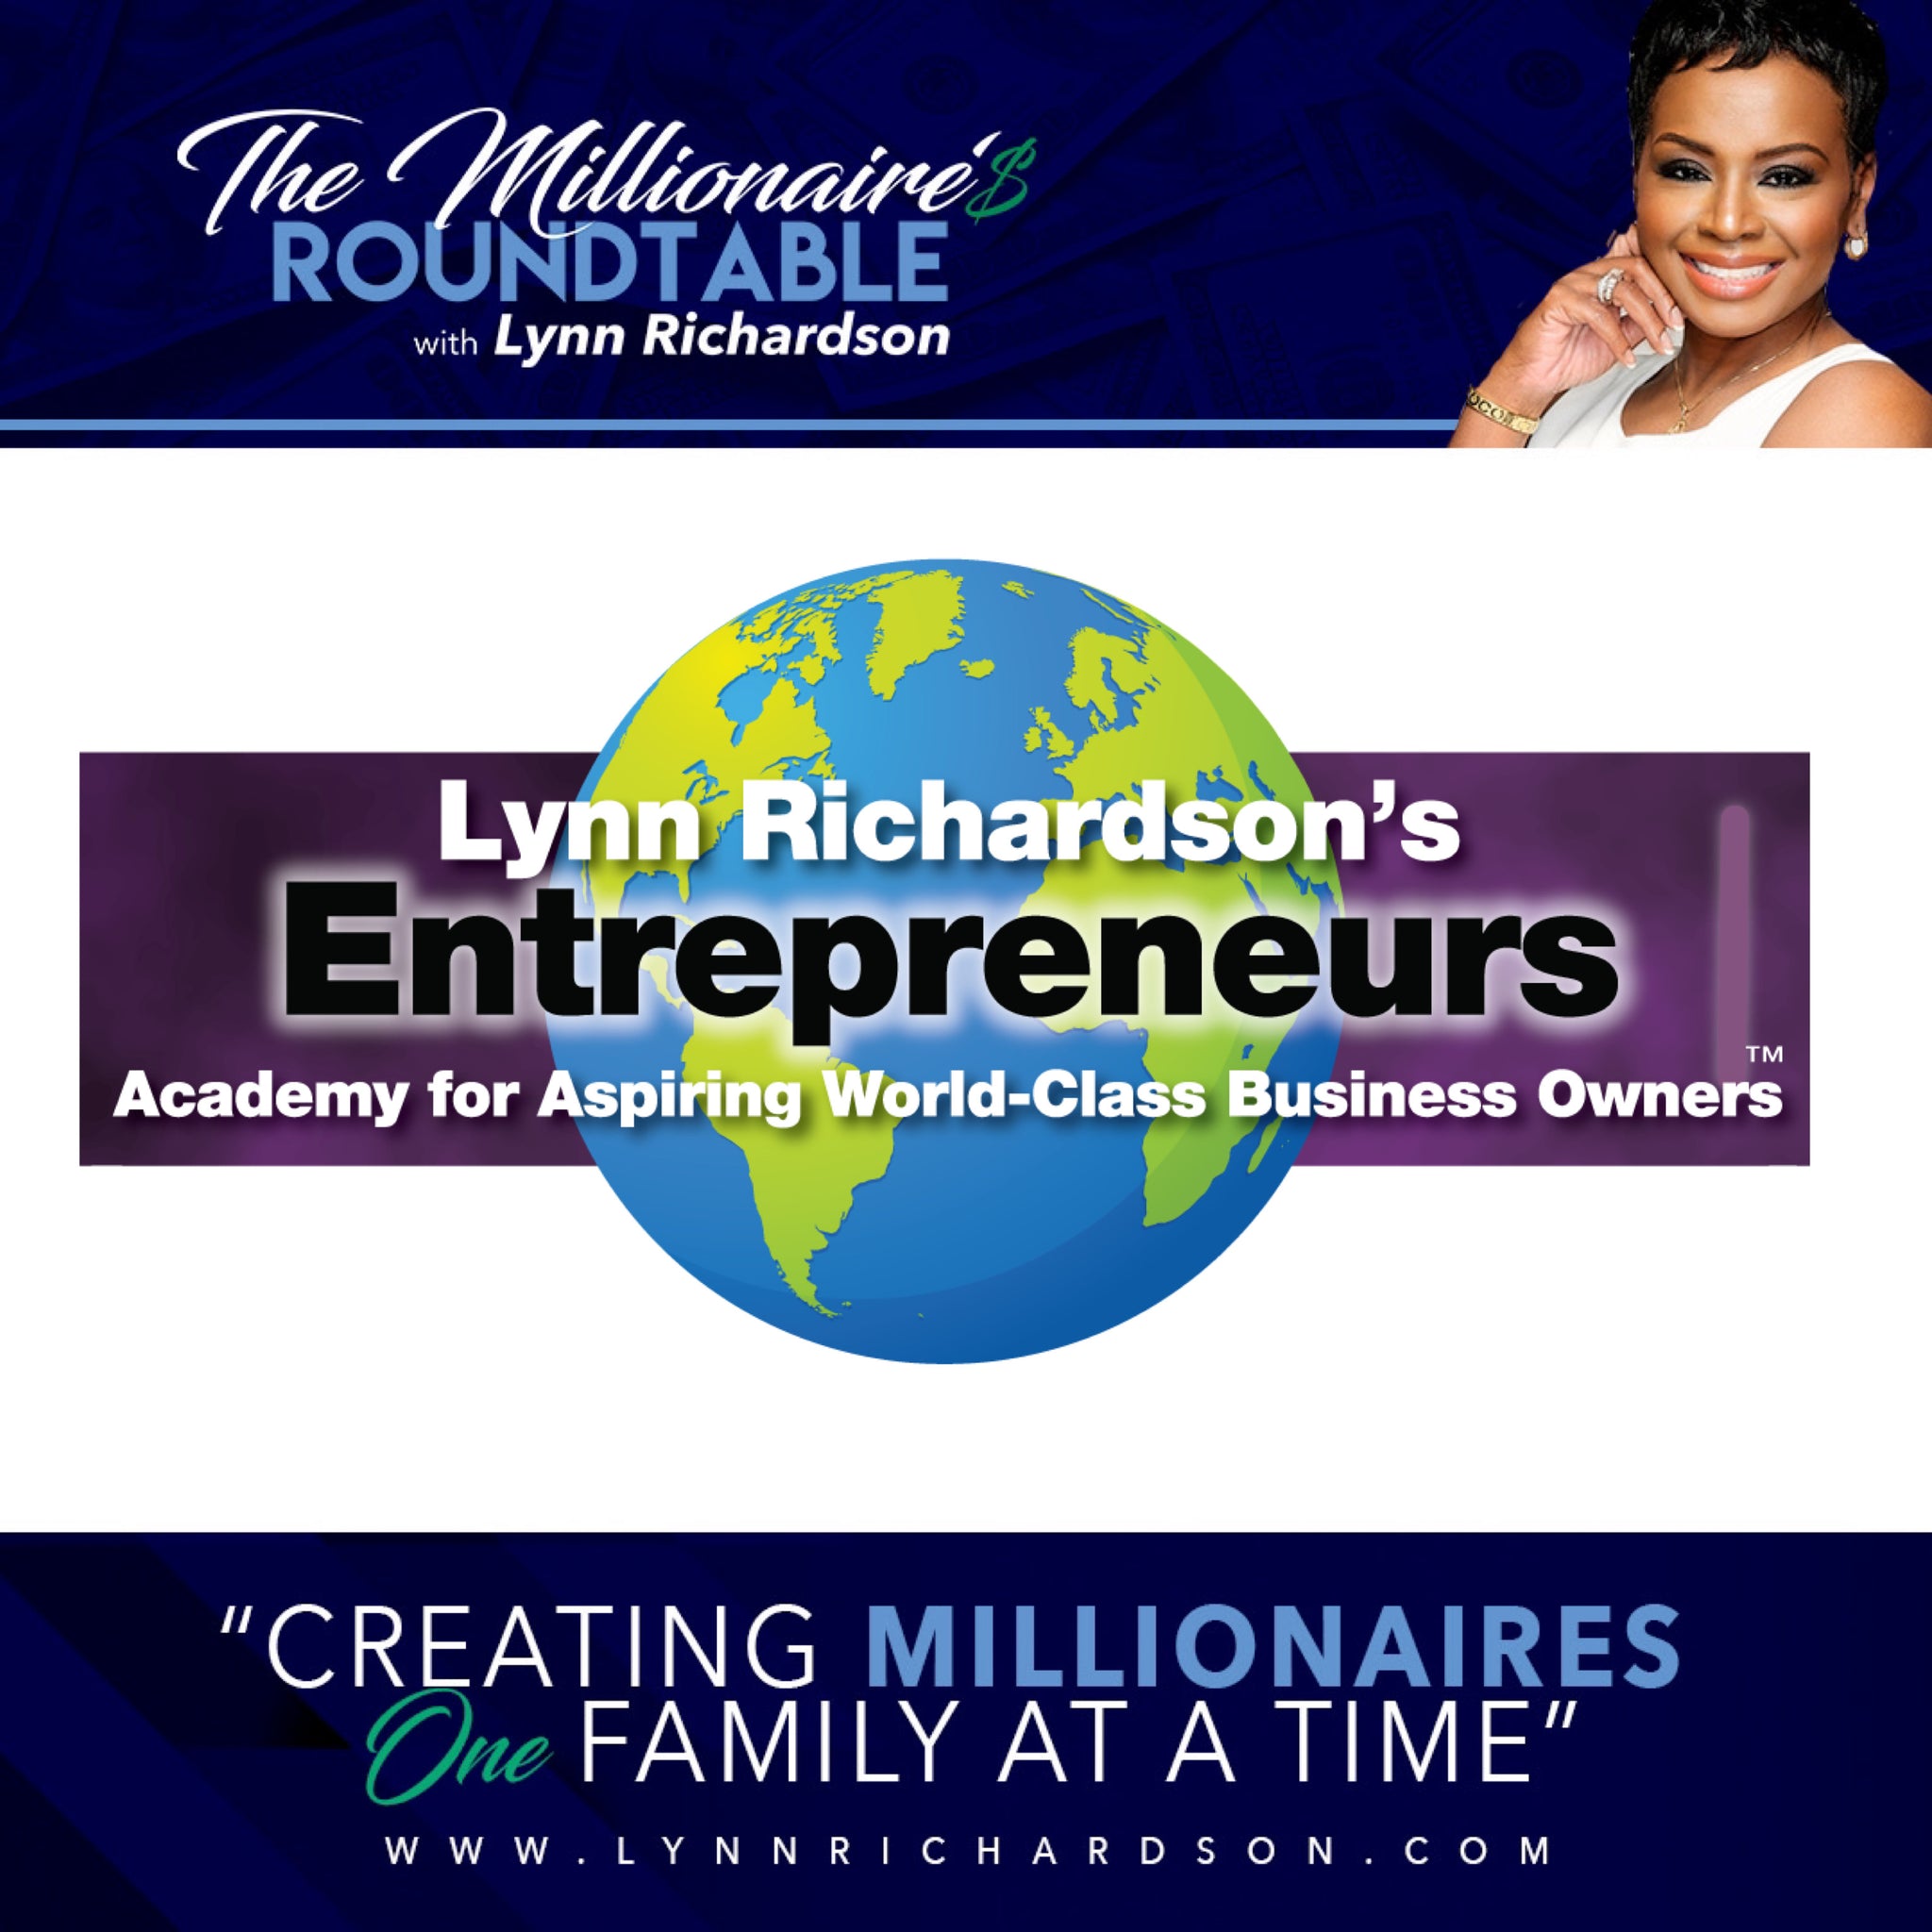 Lynn Richardson's Entrepreneurs Academy: Business Setup, Expansion, & Coaching - $100 OFF MATERIALS - NO MONTHLY PAYMENTS FOR SCHOLARSHIP RECIPIENTS